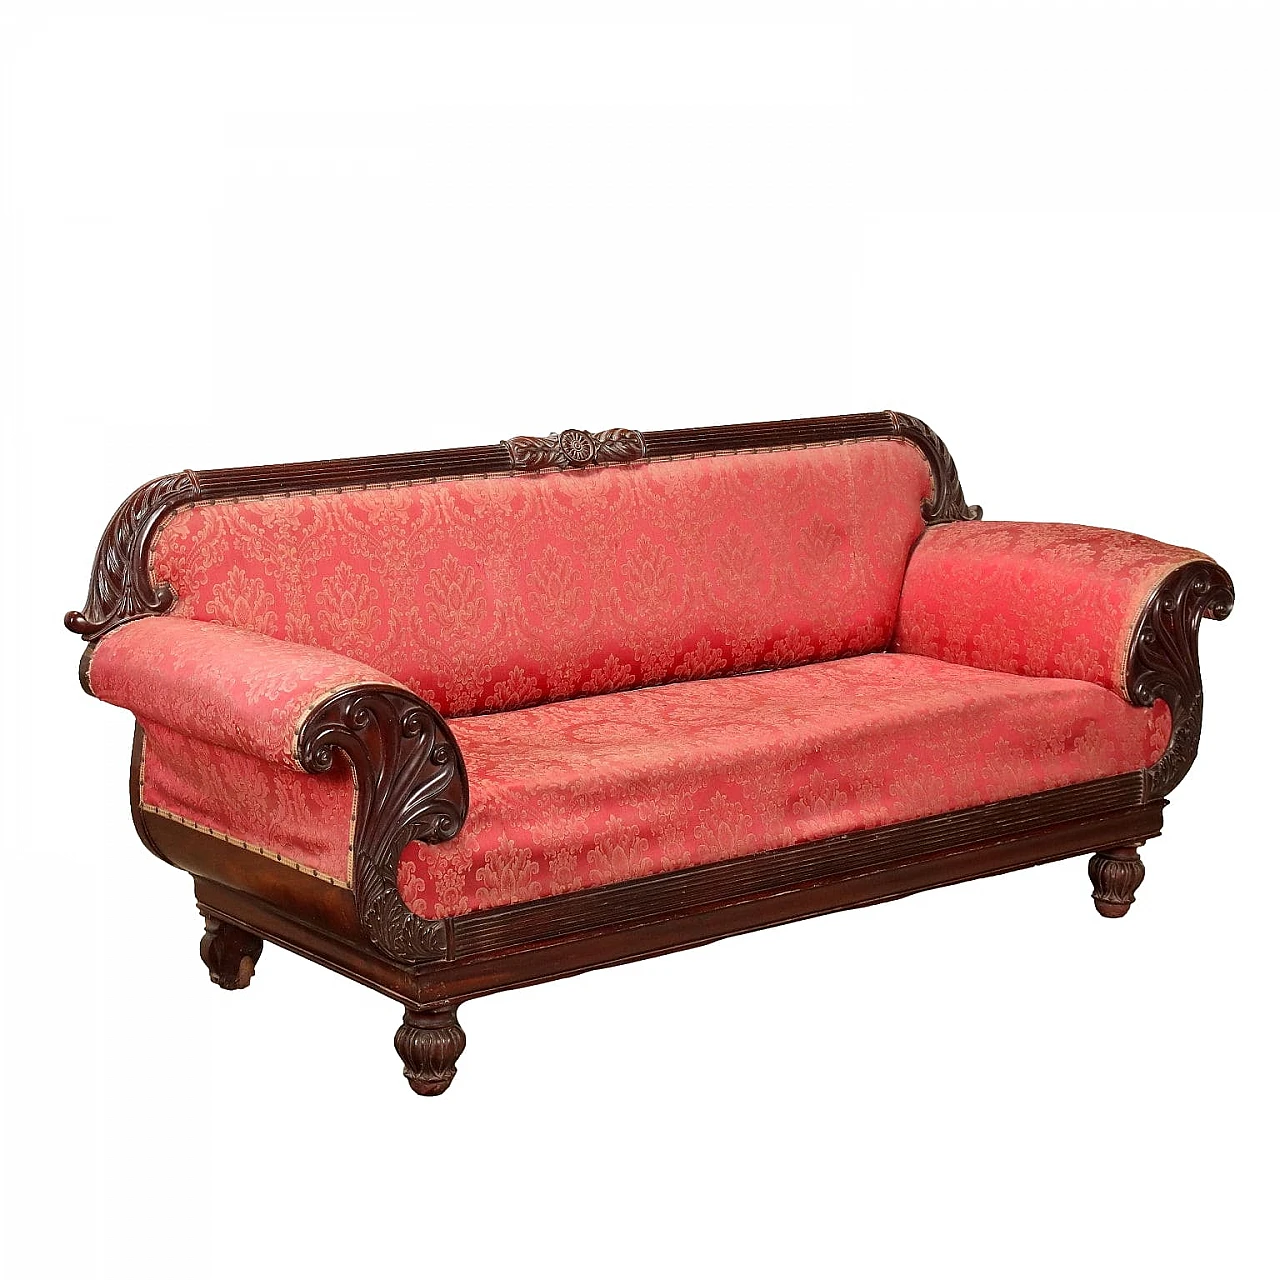 Carved mahogany sofa with pink brocade fabric, 19th century 1